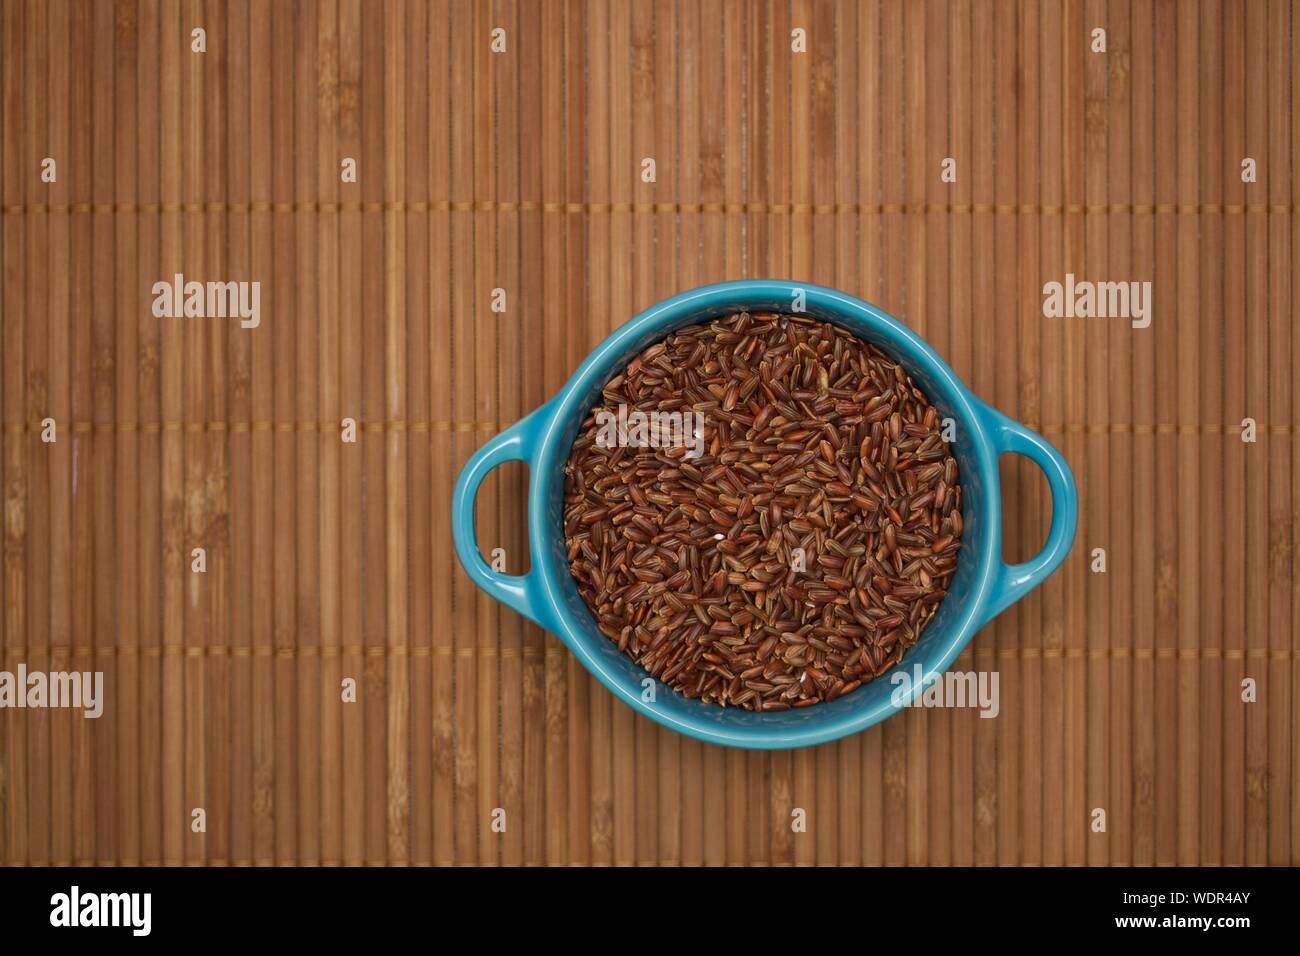 Directly Above View Of Wheat In Bowl Bamboo Mat Stock Photo